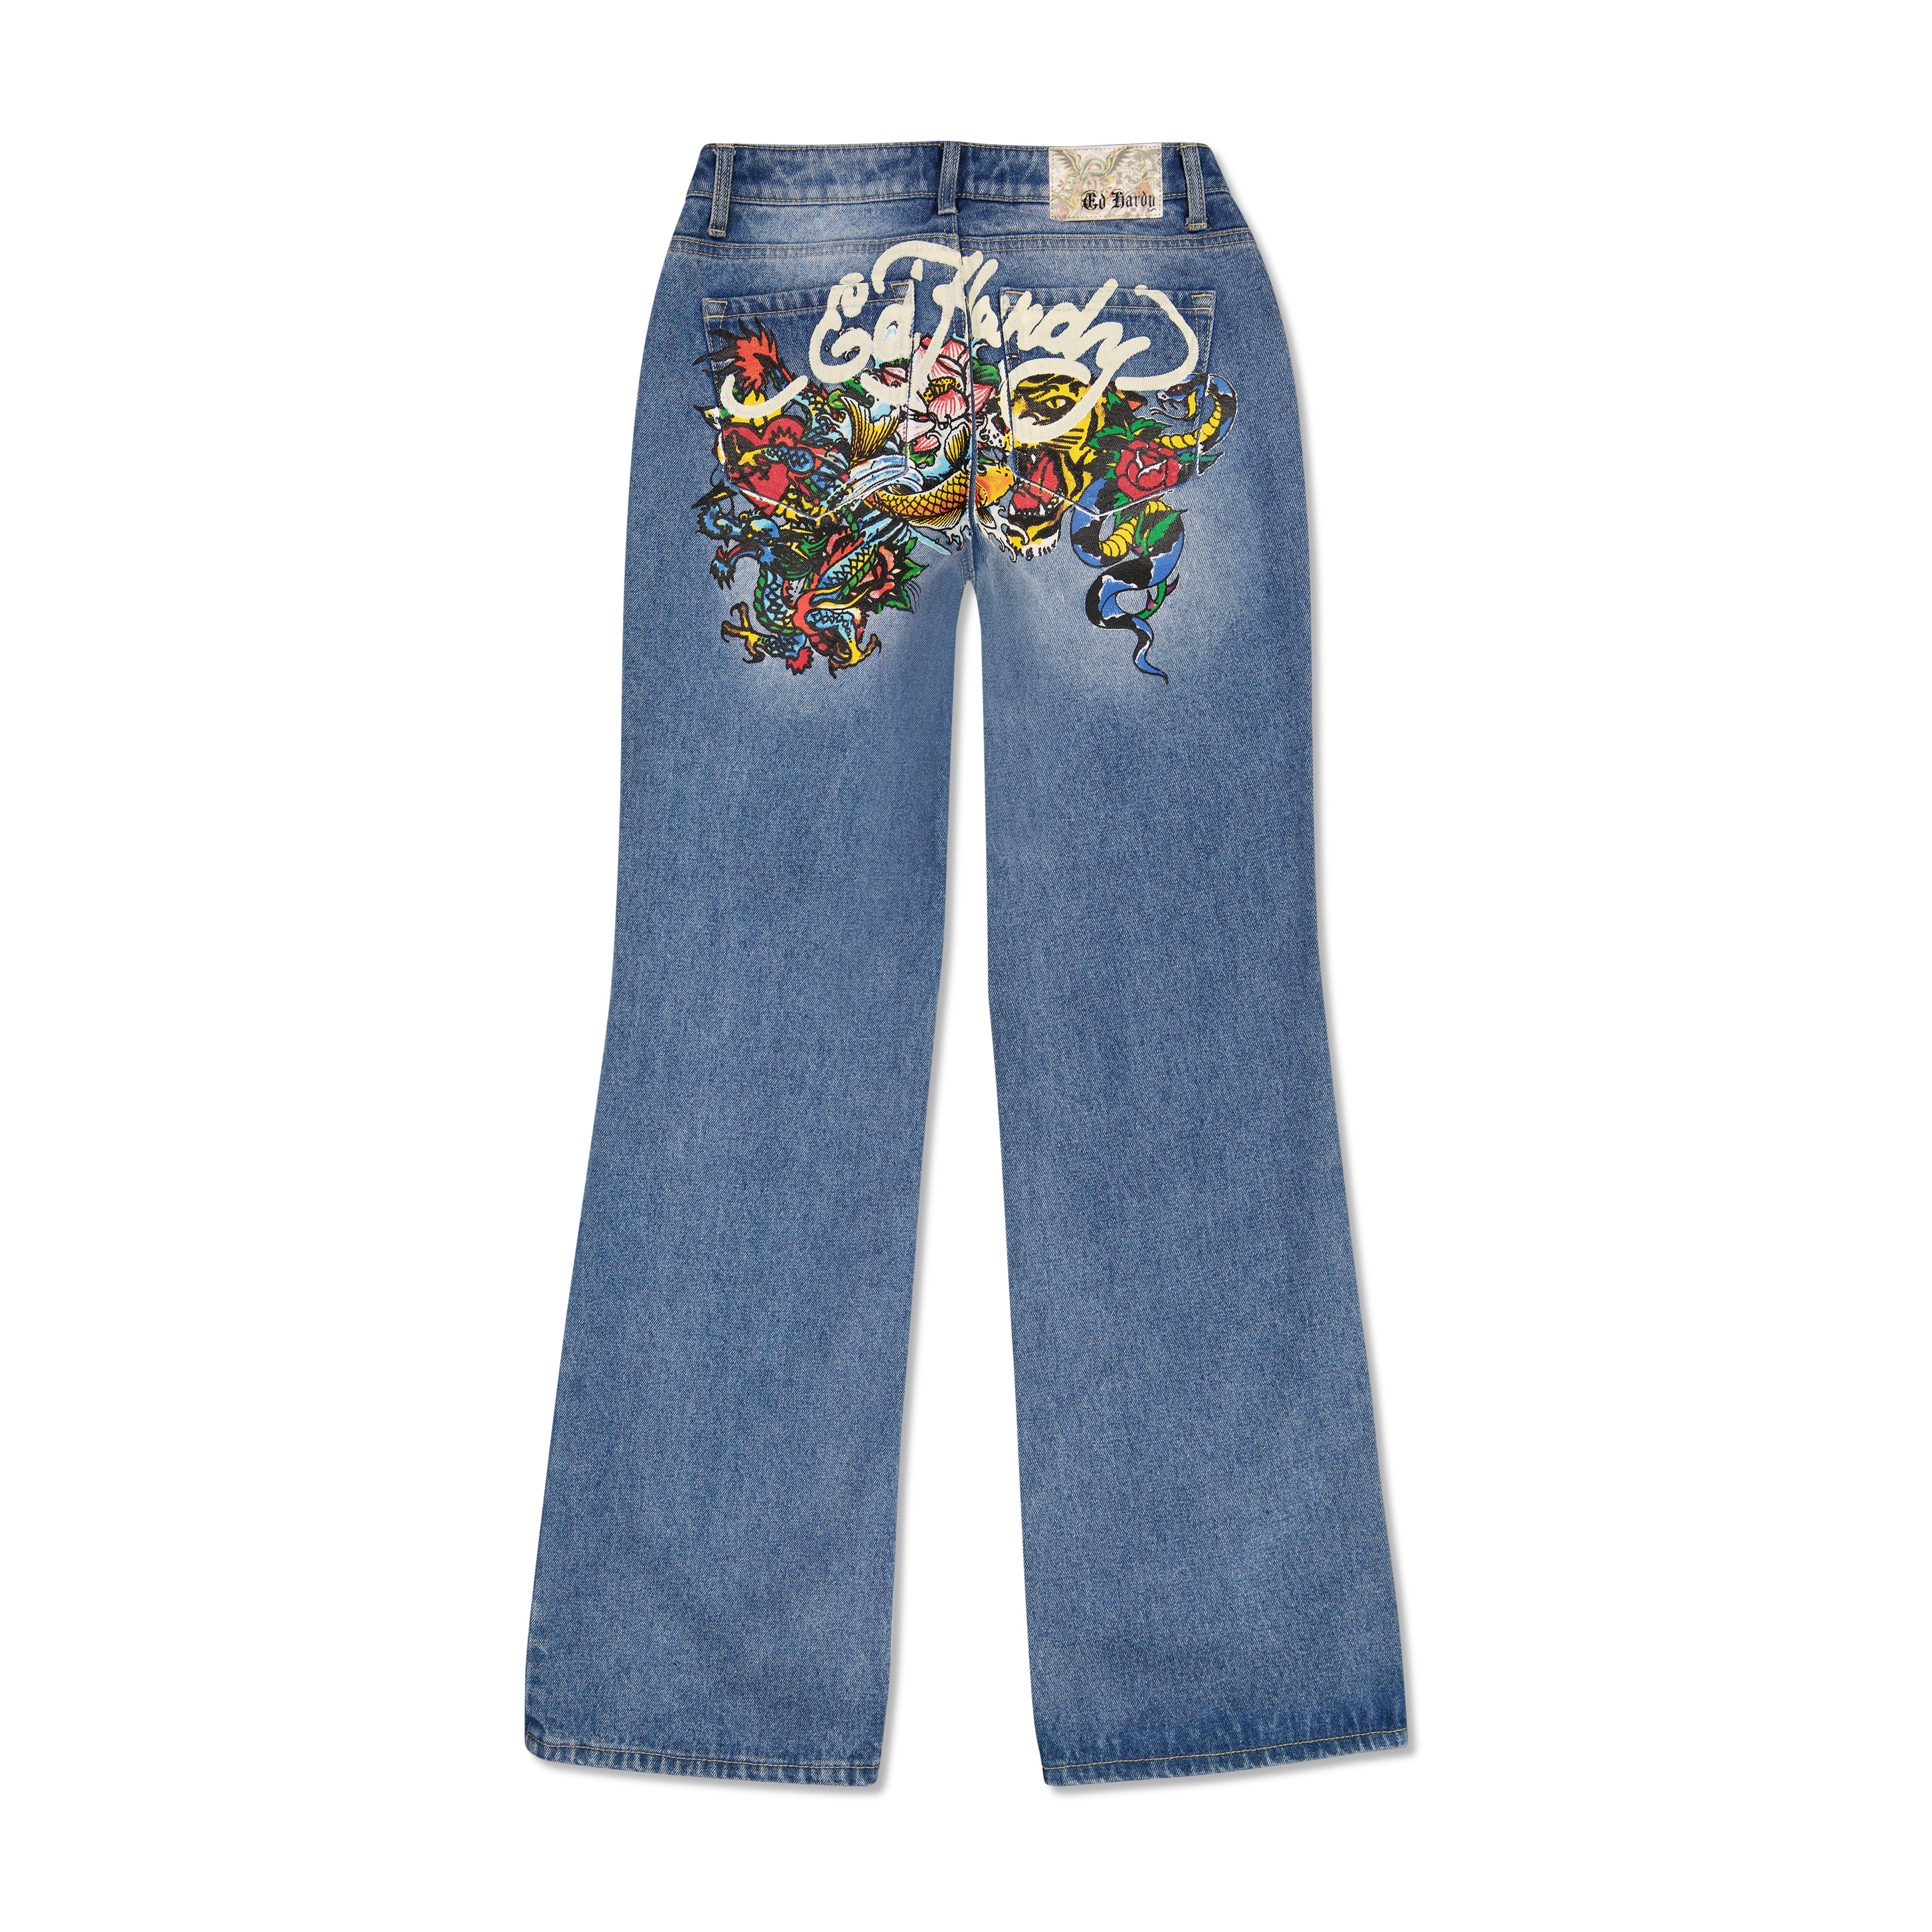 Low Waisted Jeans Graphic, Baggy Low Waist Jeans Y2k